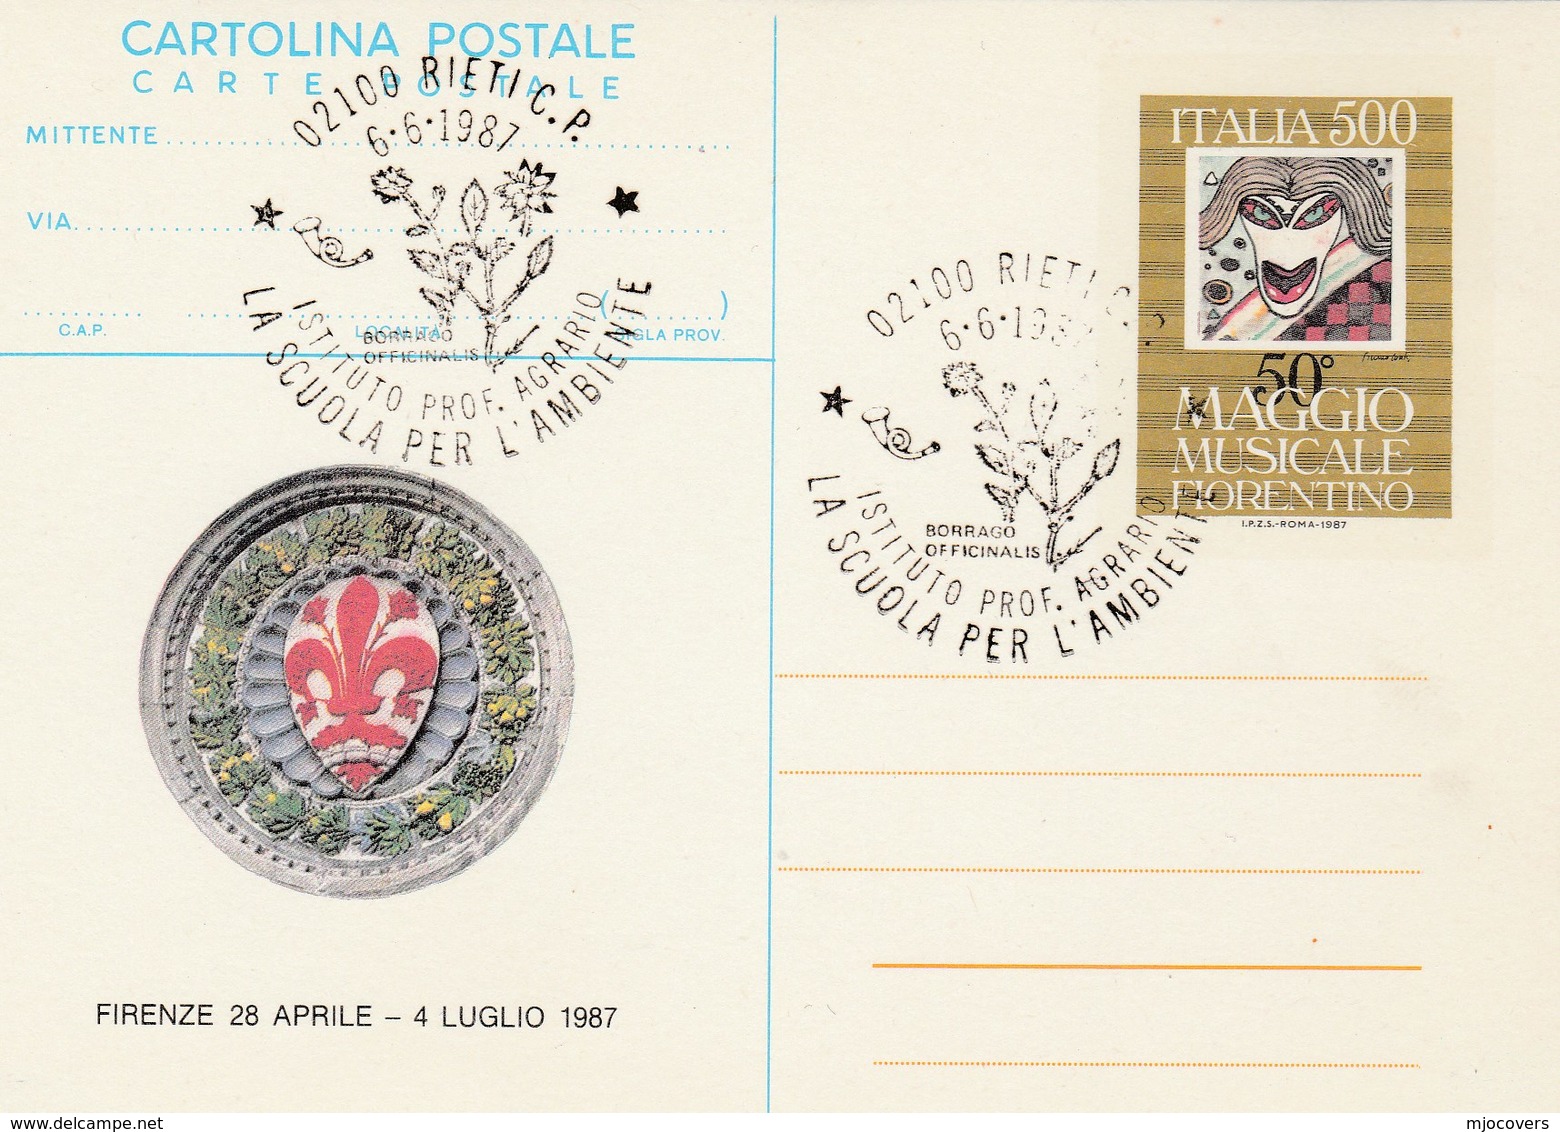 1987 Rieti AGRICULTURE ENVIRONMENT EVENT COVER  Card Postal Stationery Maggio Musicale Music Flower Flowers Stamps Italy - Milieubescherming & Klimaat